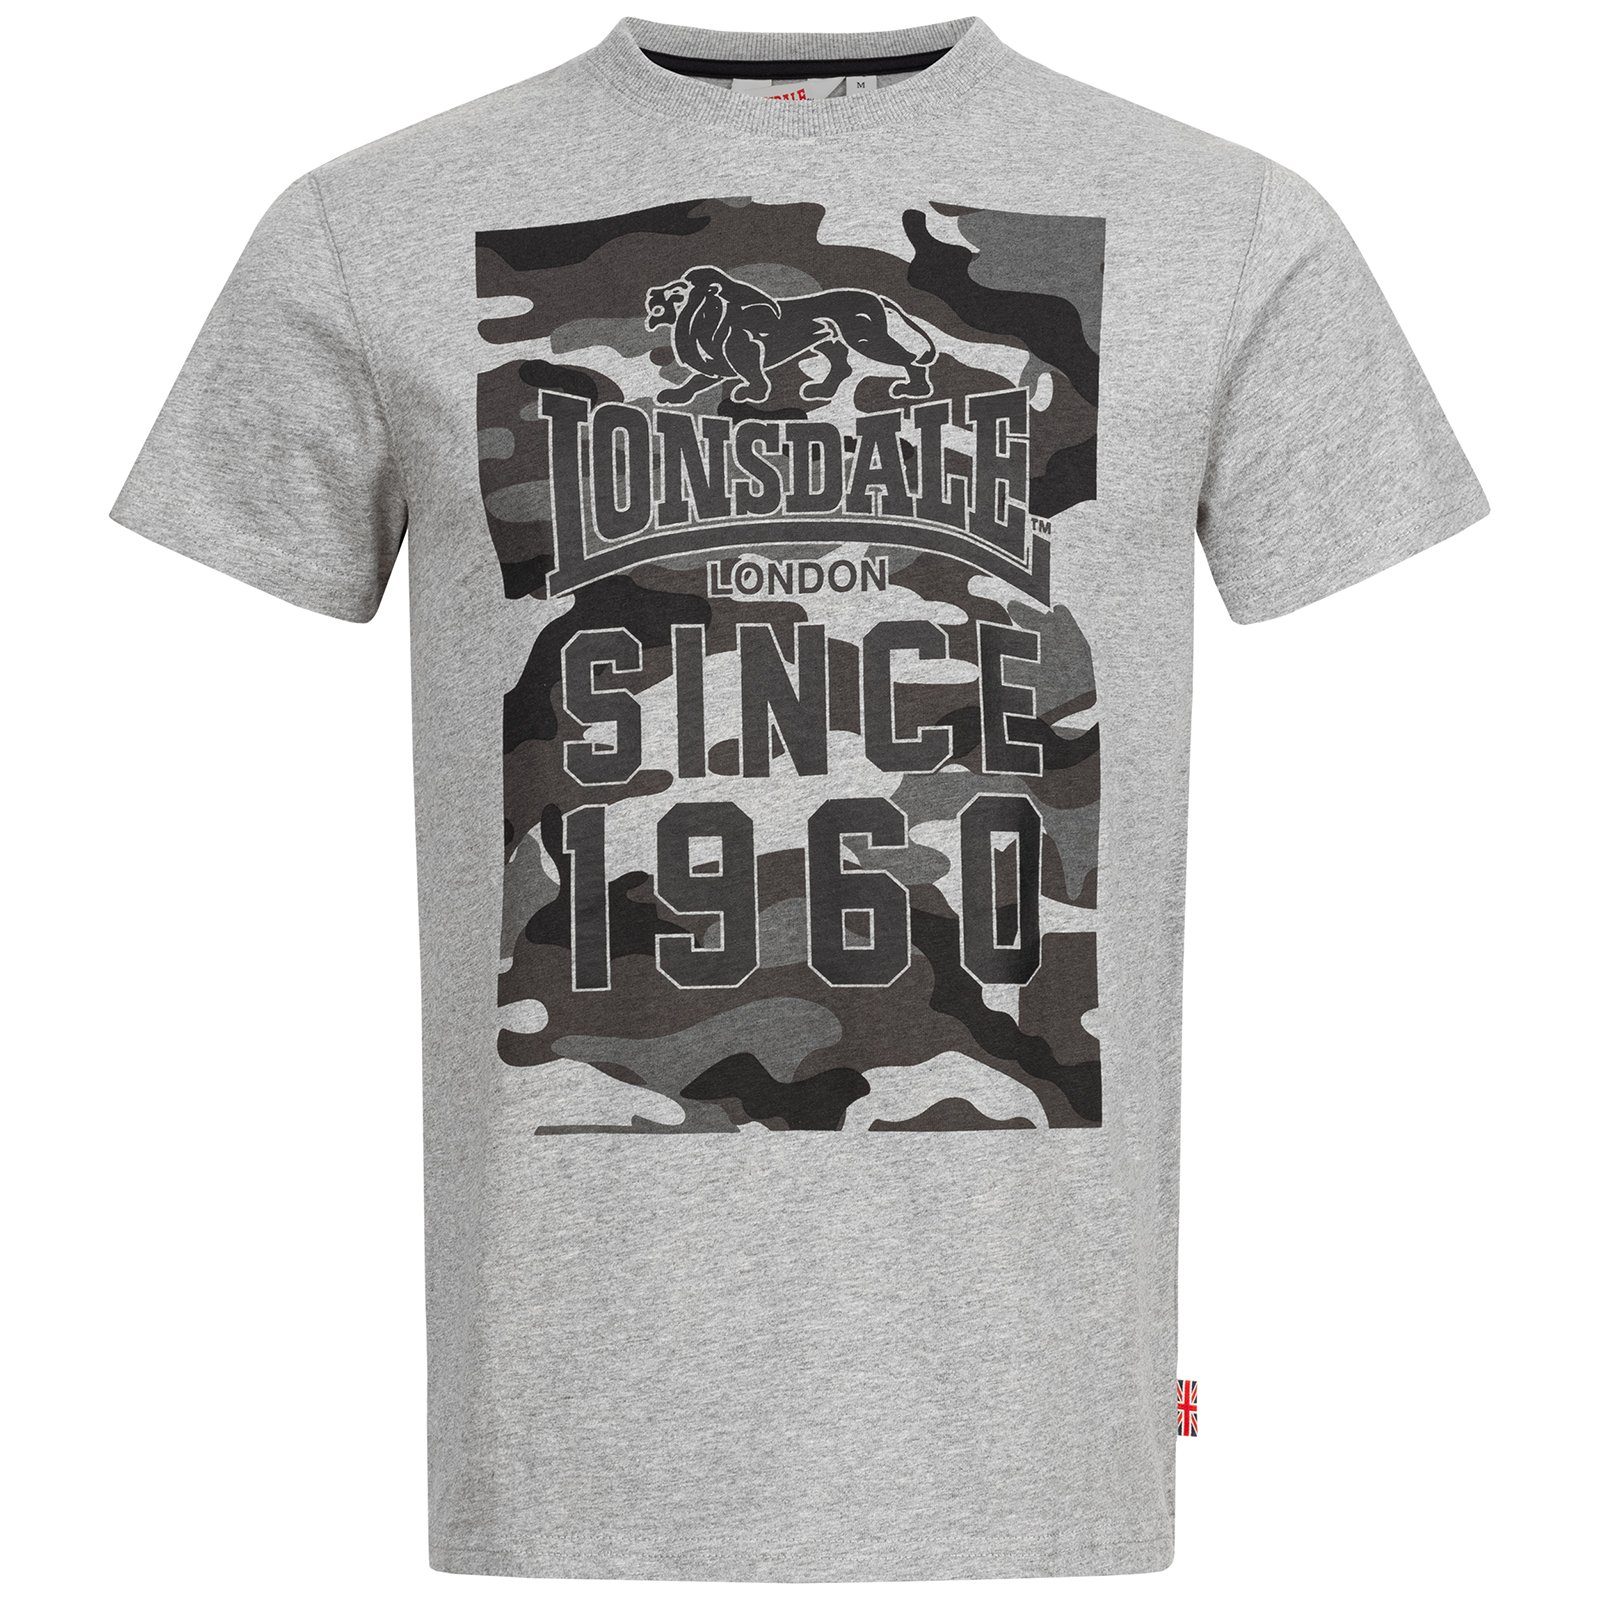 LONDON Lonsdale Stroth LONSDALE T-Shirt T-Shirt